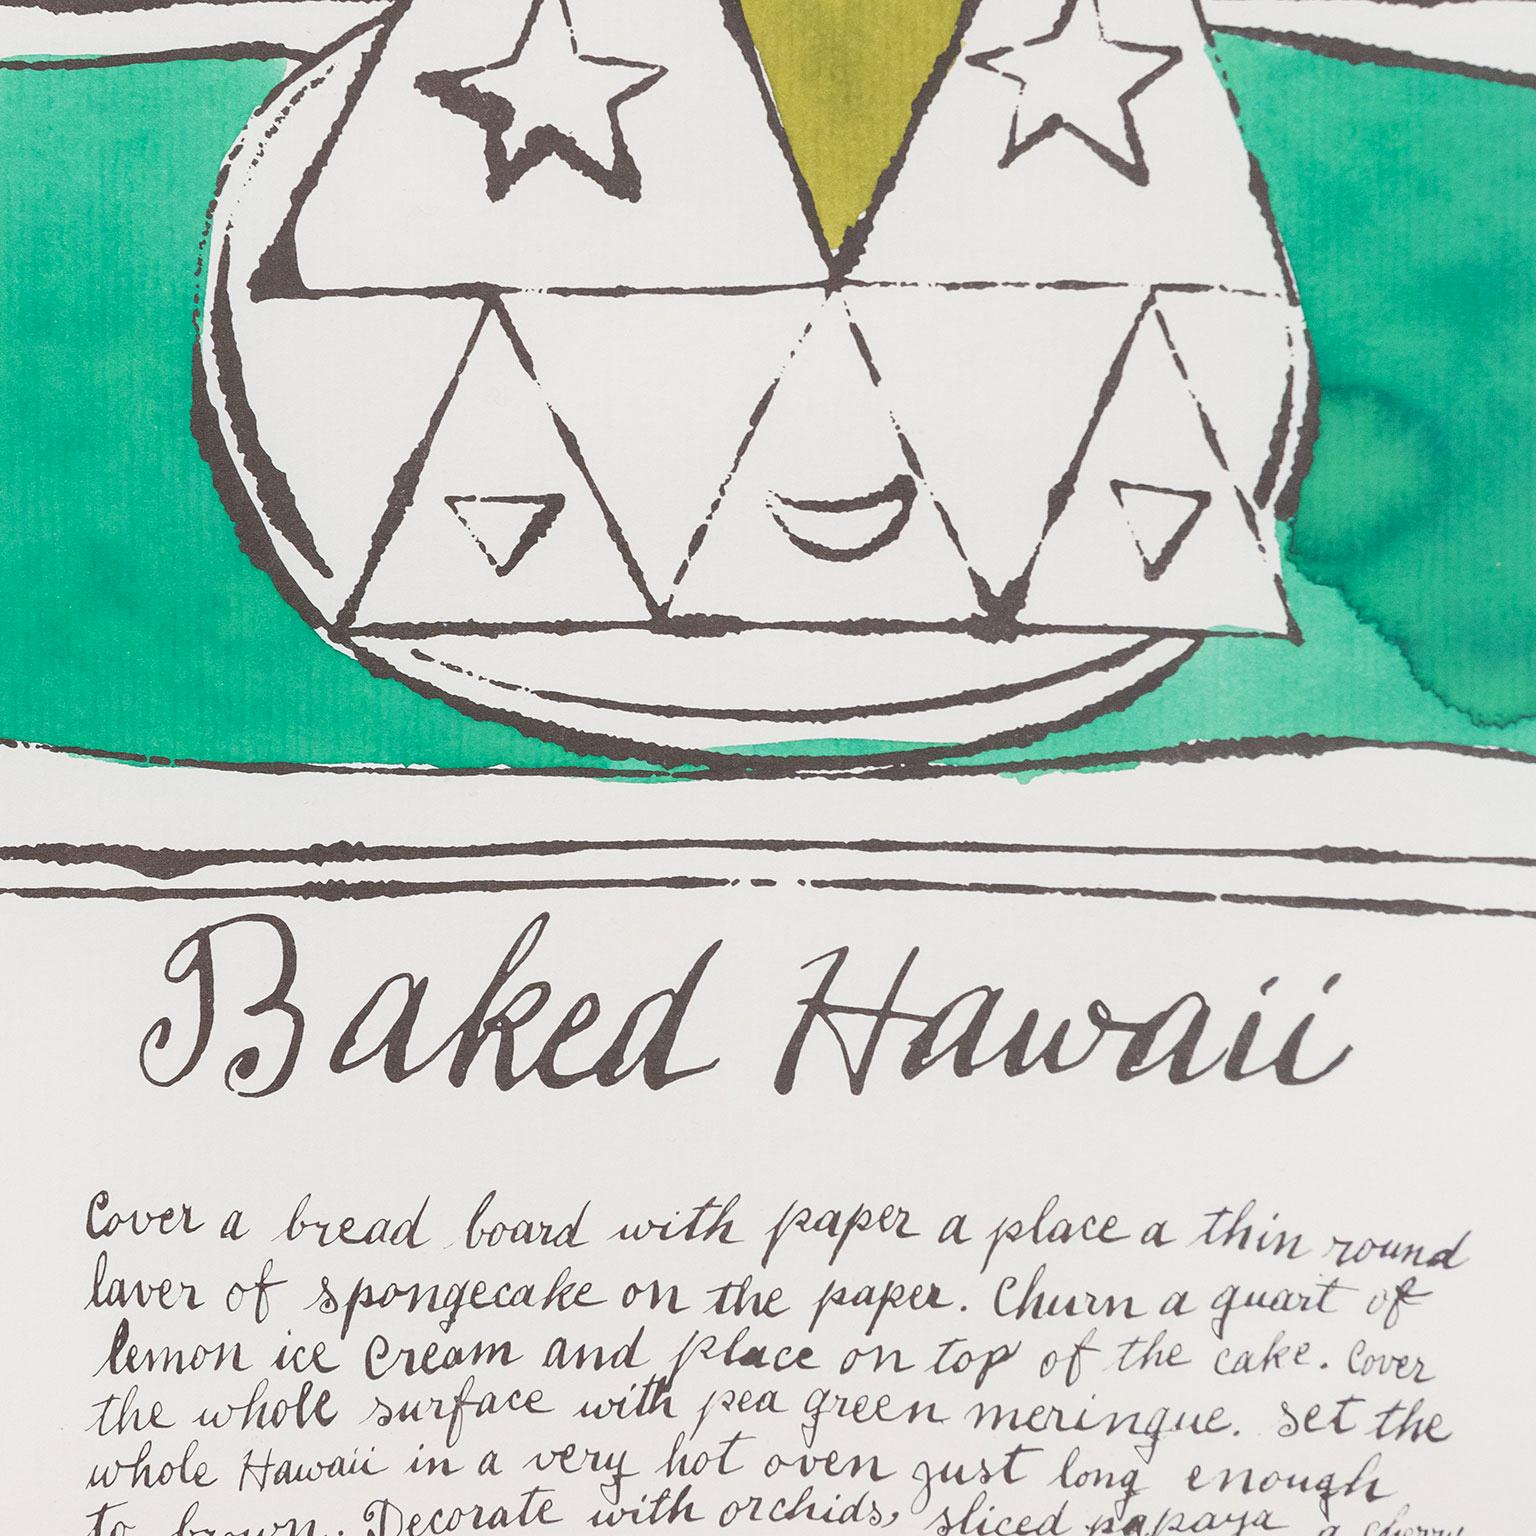 Baked Hawaii, Wild Raspberries, USA, 1959, Lithograph with hand-coloring 8